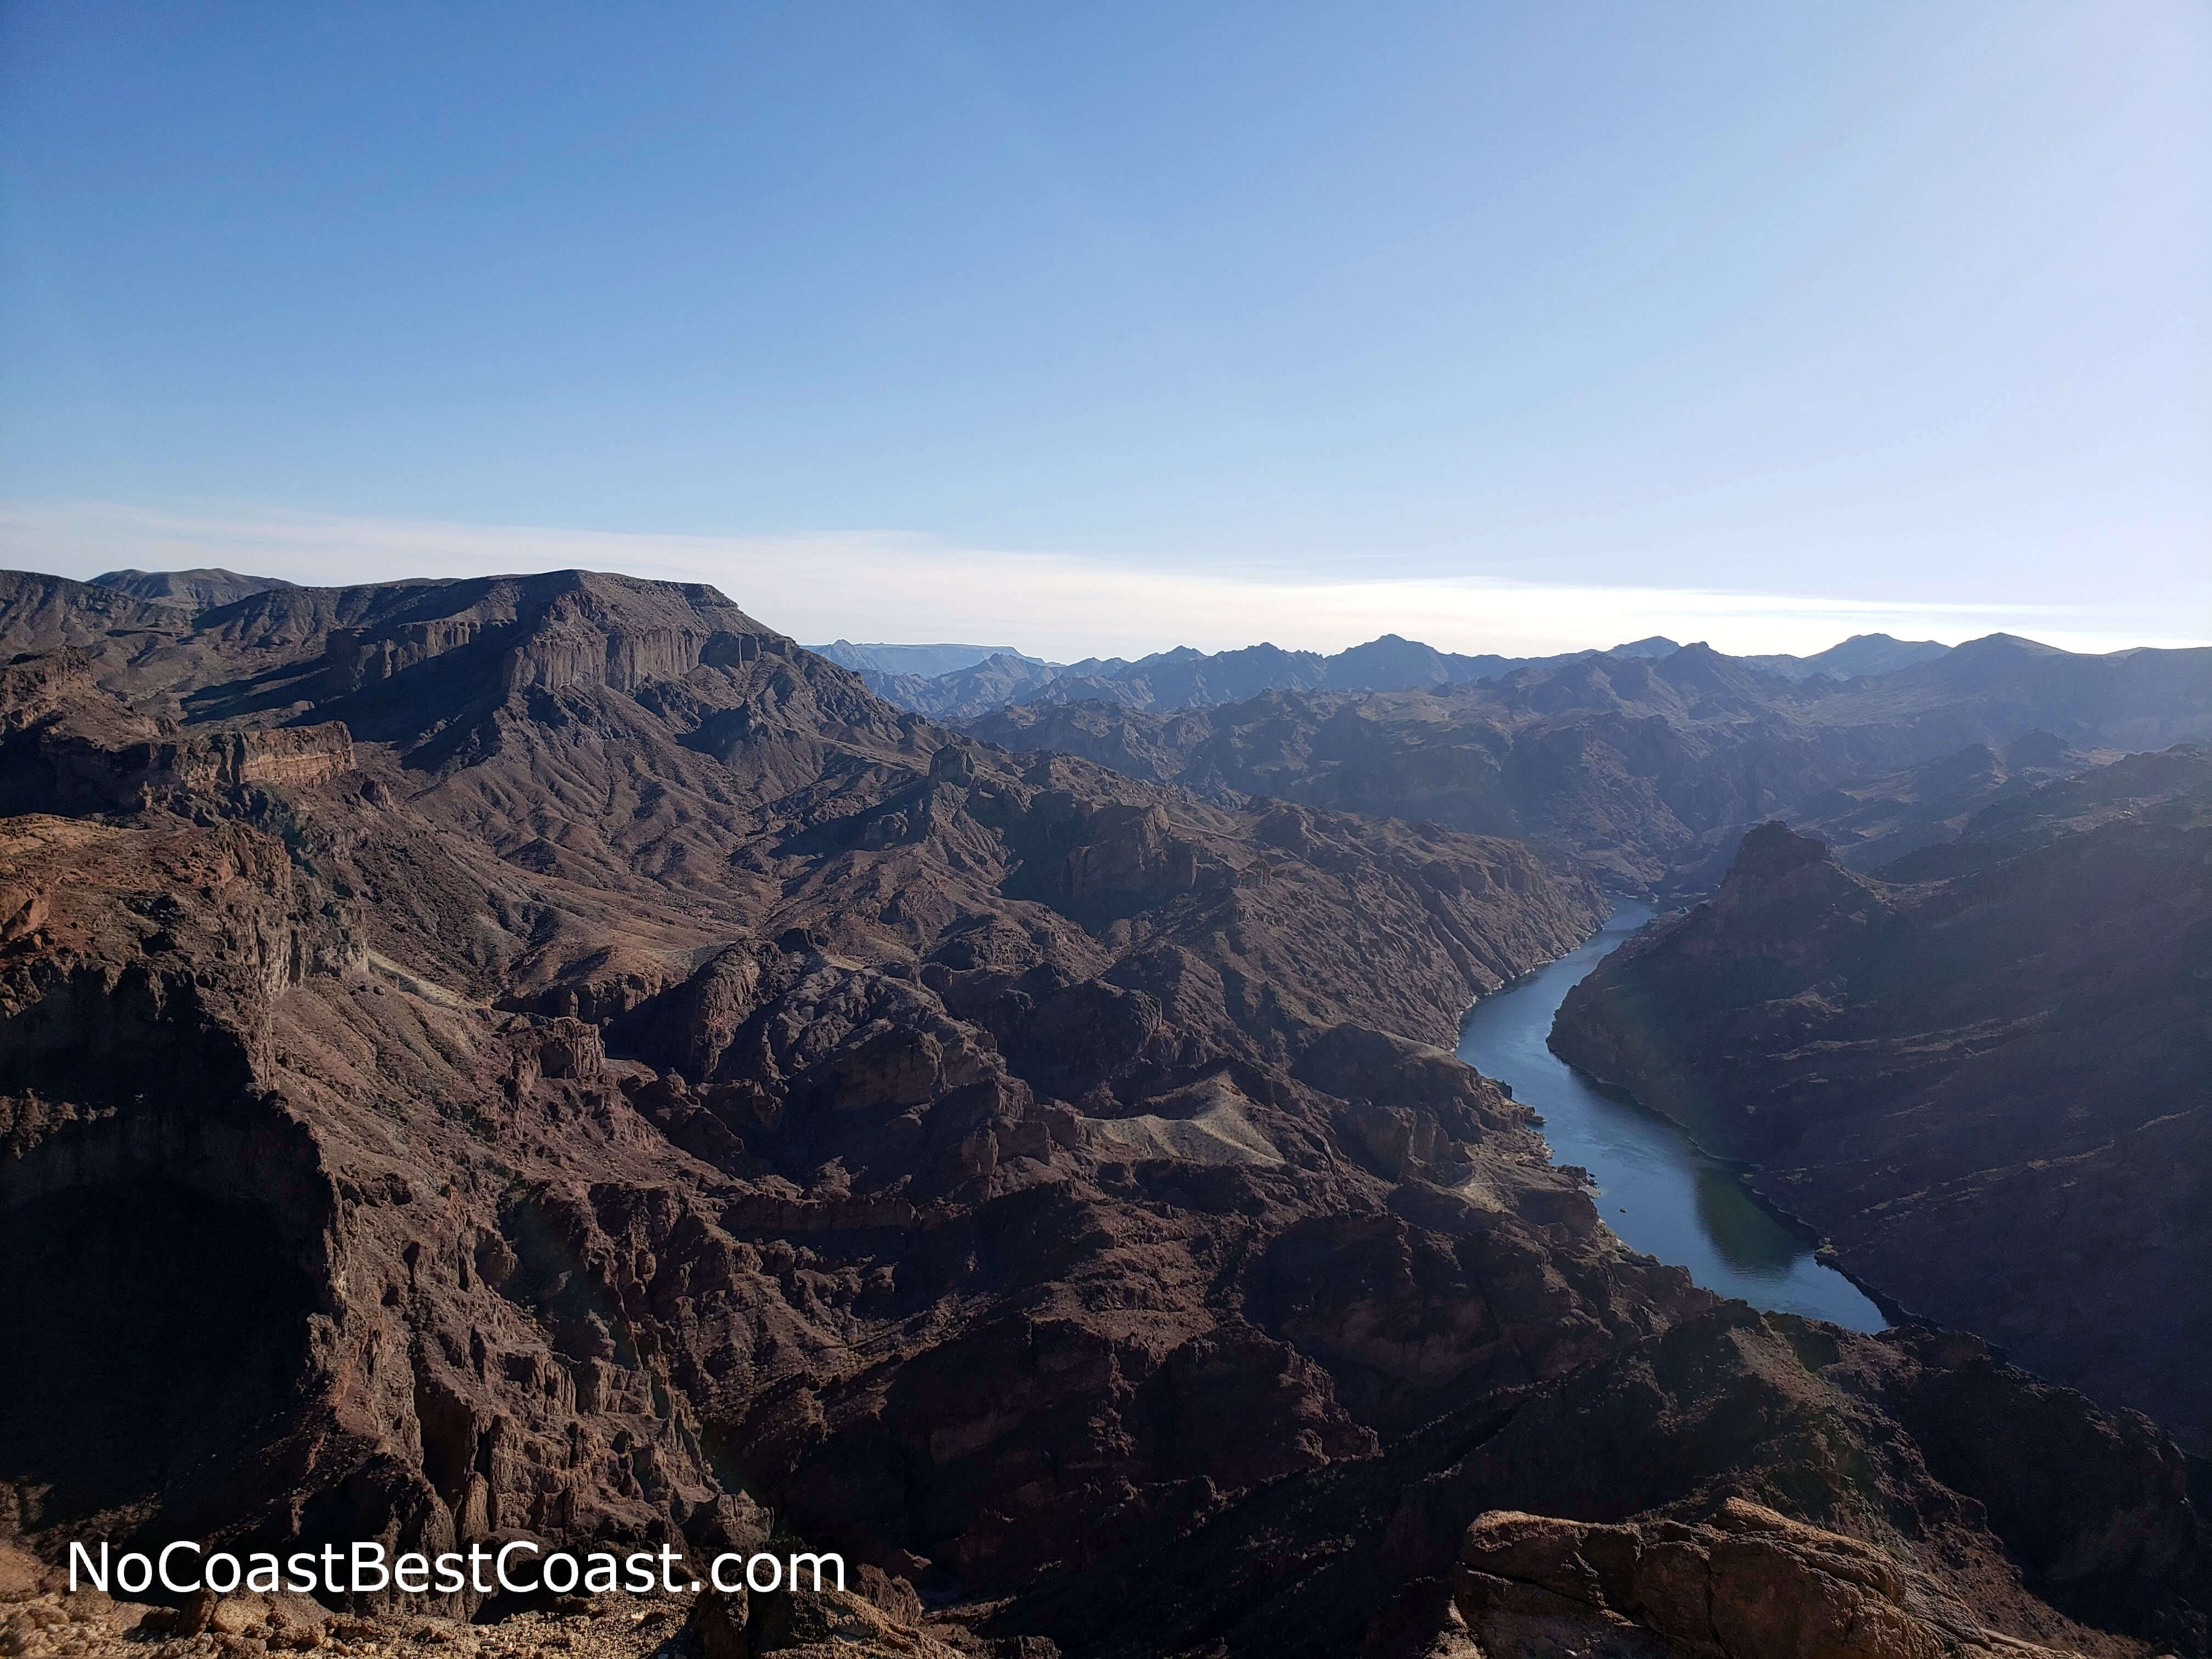 The view of the Colorado River looking south